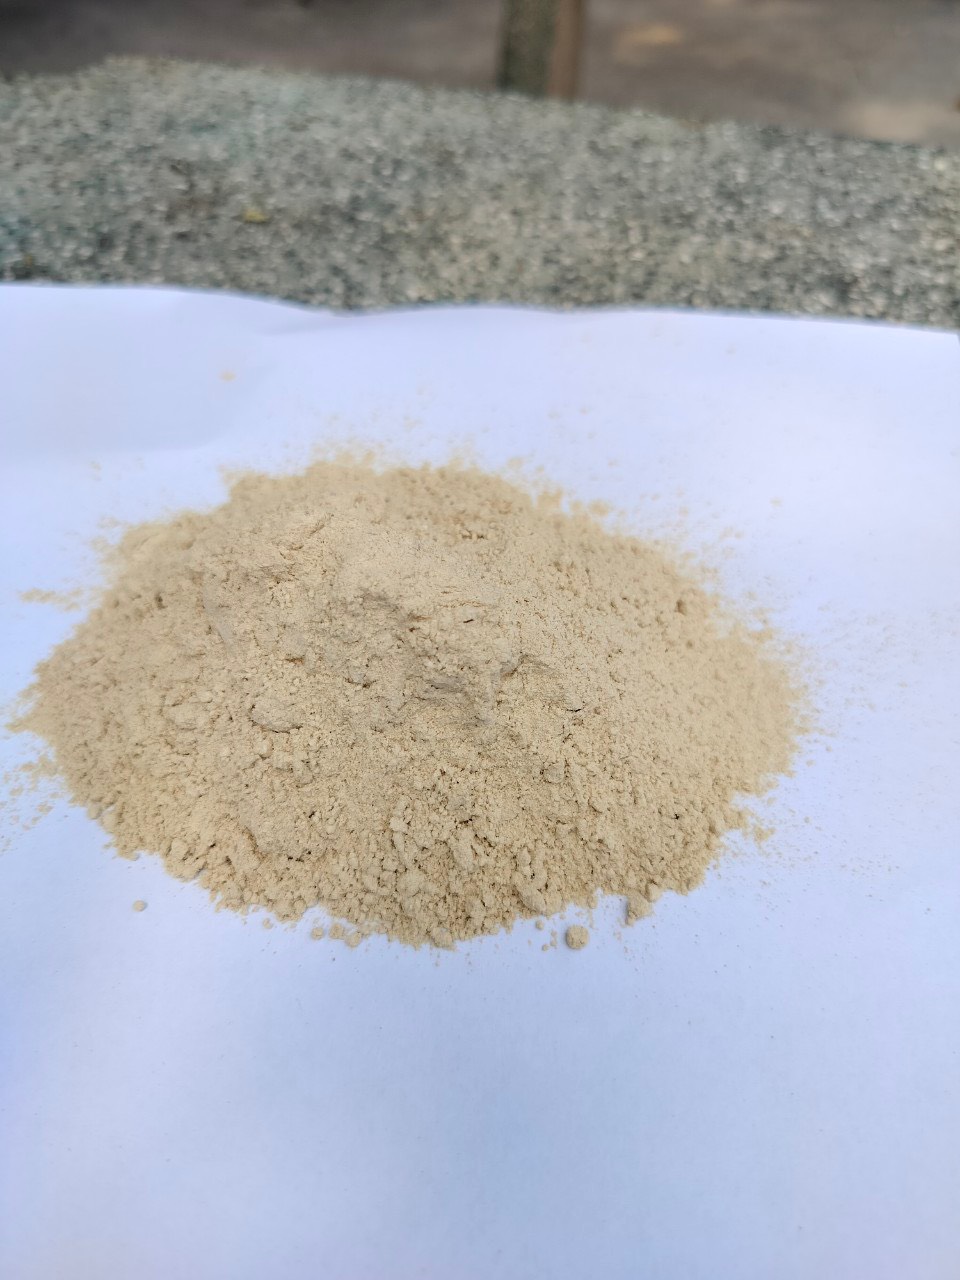 Applications of brewer's yeast in animal feed.